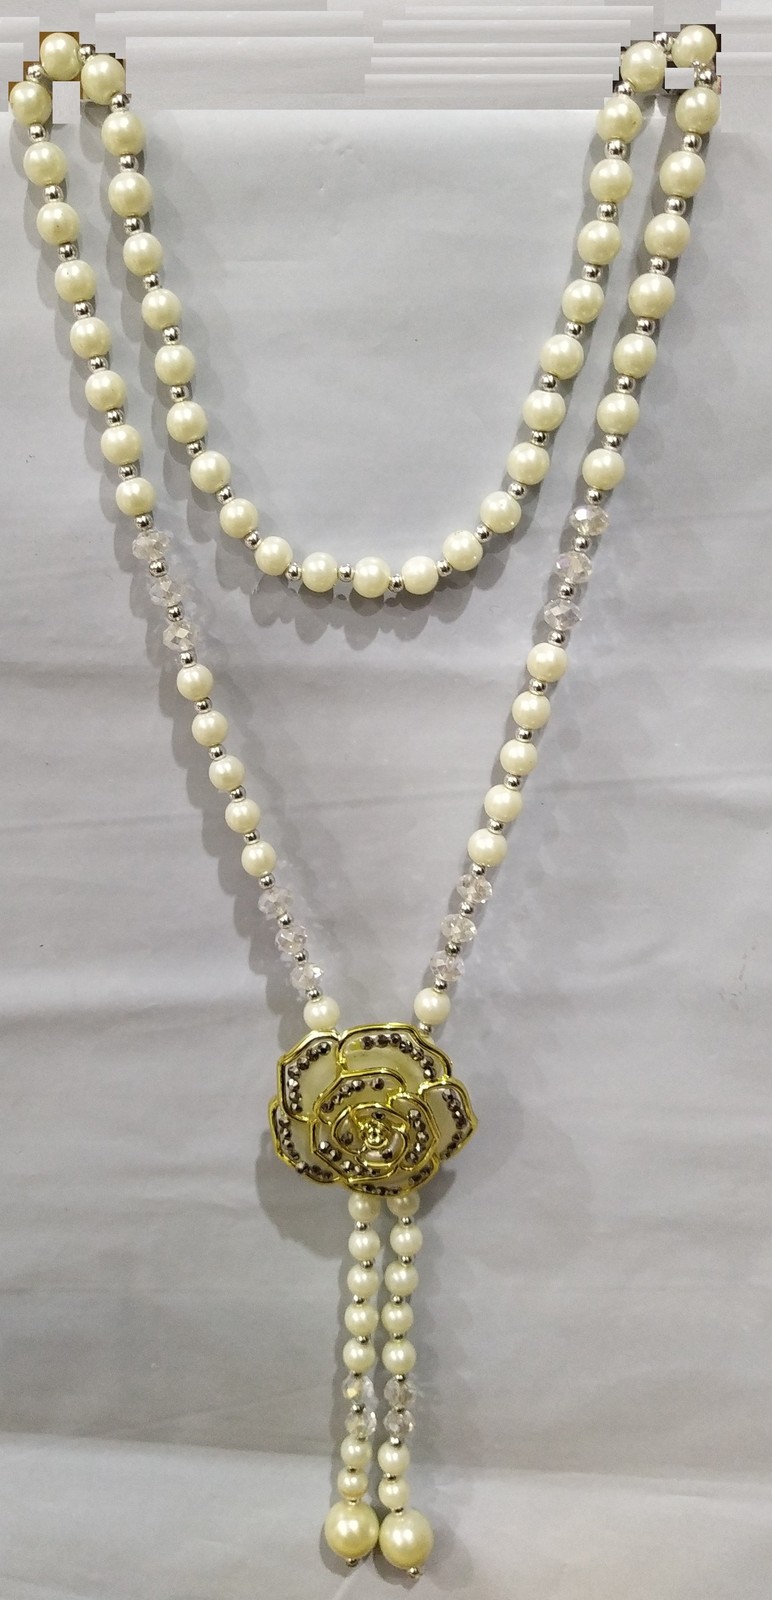 Pearl Necklace - $22.47